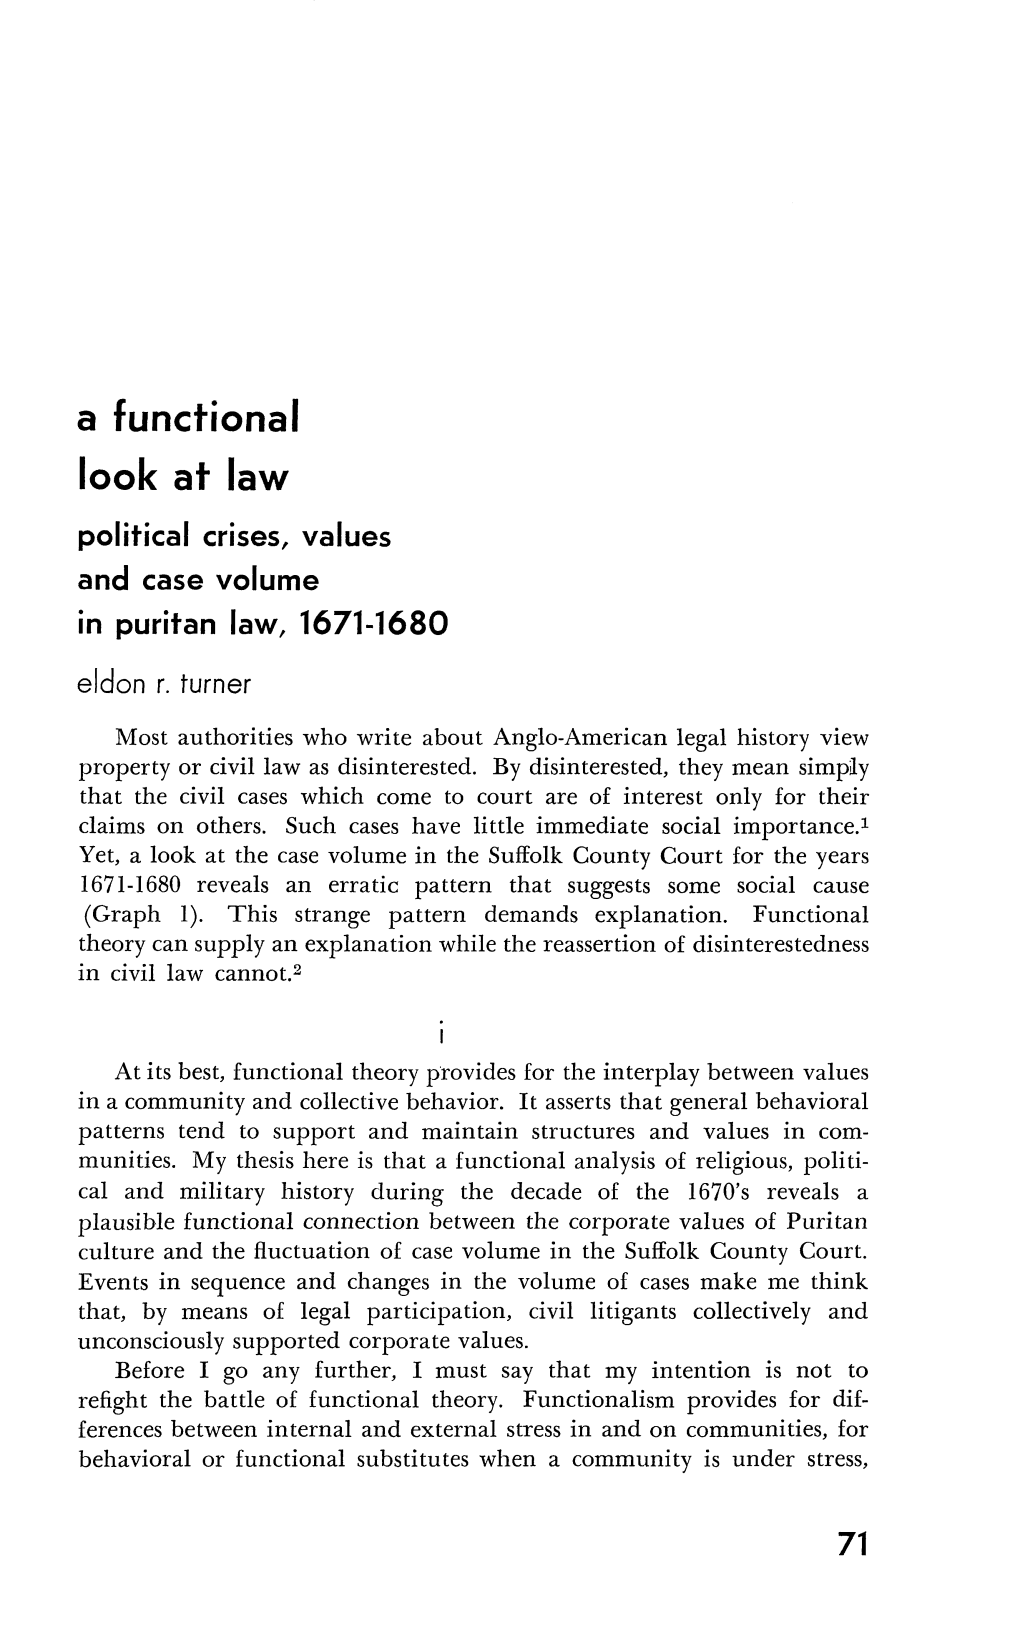 A Functional Look at Law Political Crises, Values and Case Volume in Puritan Law, 1671-1680 Eldon R